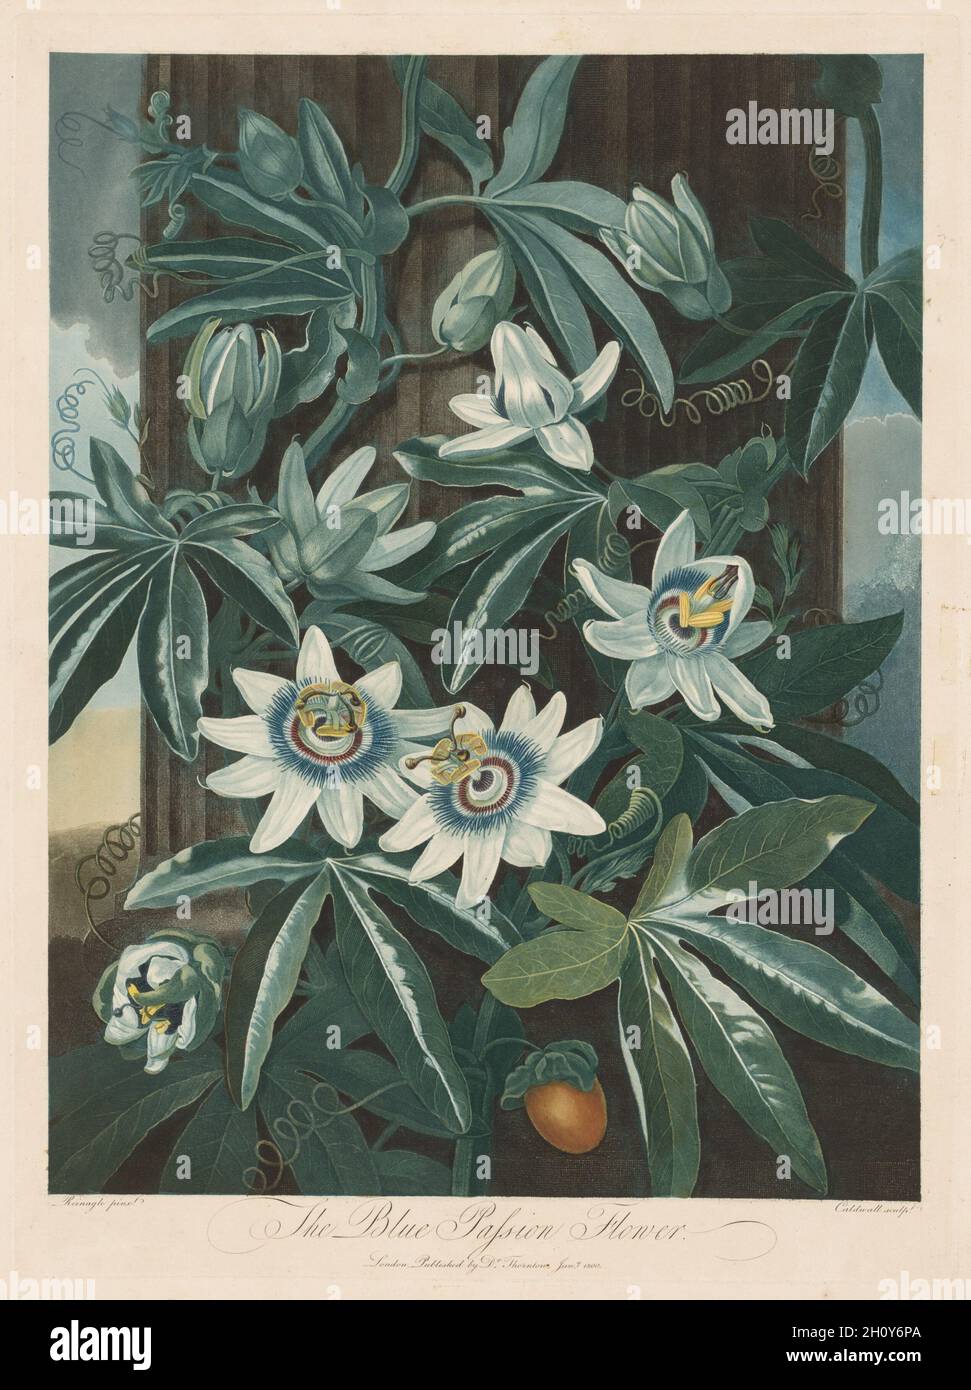 The Blue Passion-flower, 1799-1807. Robert John Thornton (British, 1768-1837). Aquatint, stipple, line engraving, etching and roulette;  In the 18th century, new engraving and etching techniques offered a variety of tonal effects that enhanced botanical prints. While mezzotint (in which the plate is roughened and then the engraver works from dark to light creating different values) and stipple (dots create values) make it possible to create the rich tonal scale and velvety texture of oil paint, aquatint imitates the delicacy and transparency of watercolor and ink wash. Stock Photo